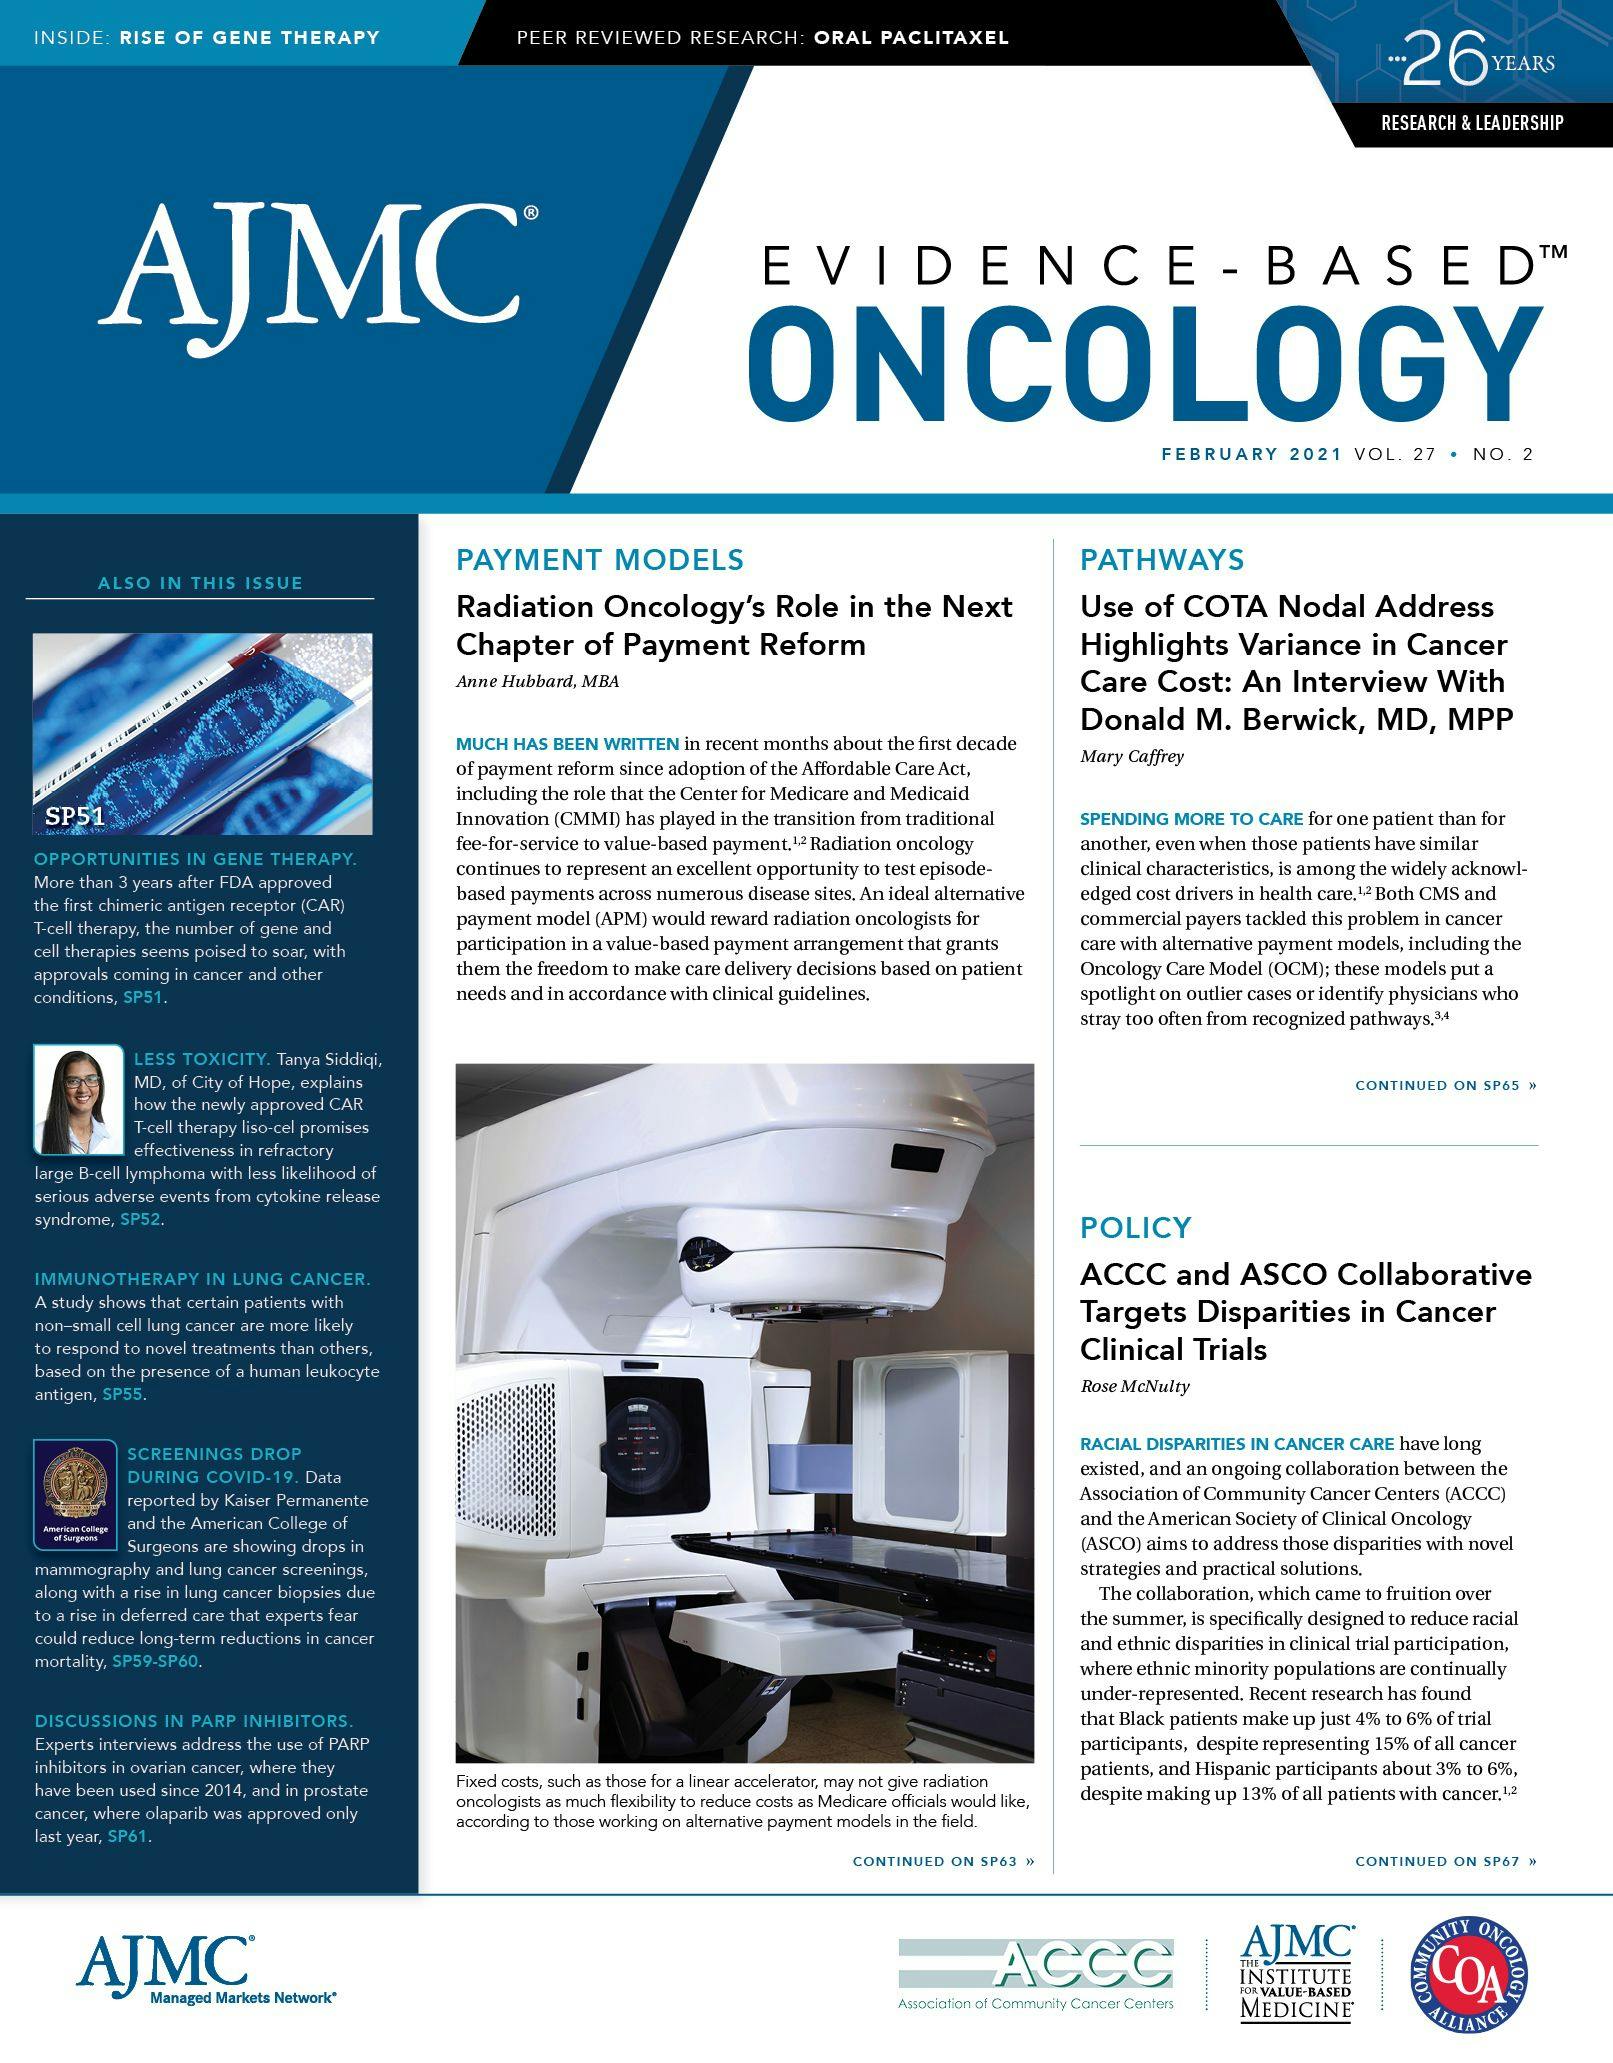 Evidence Based Oncology